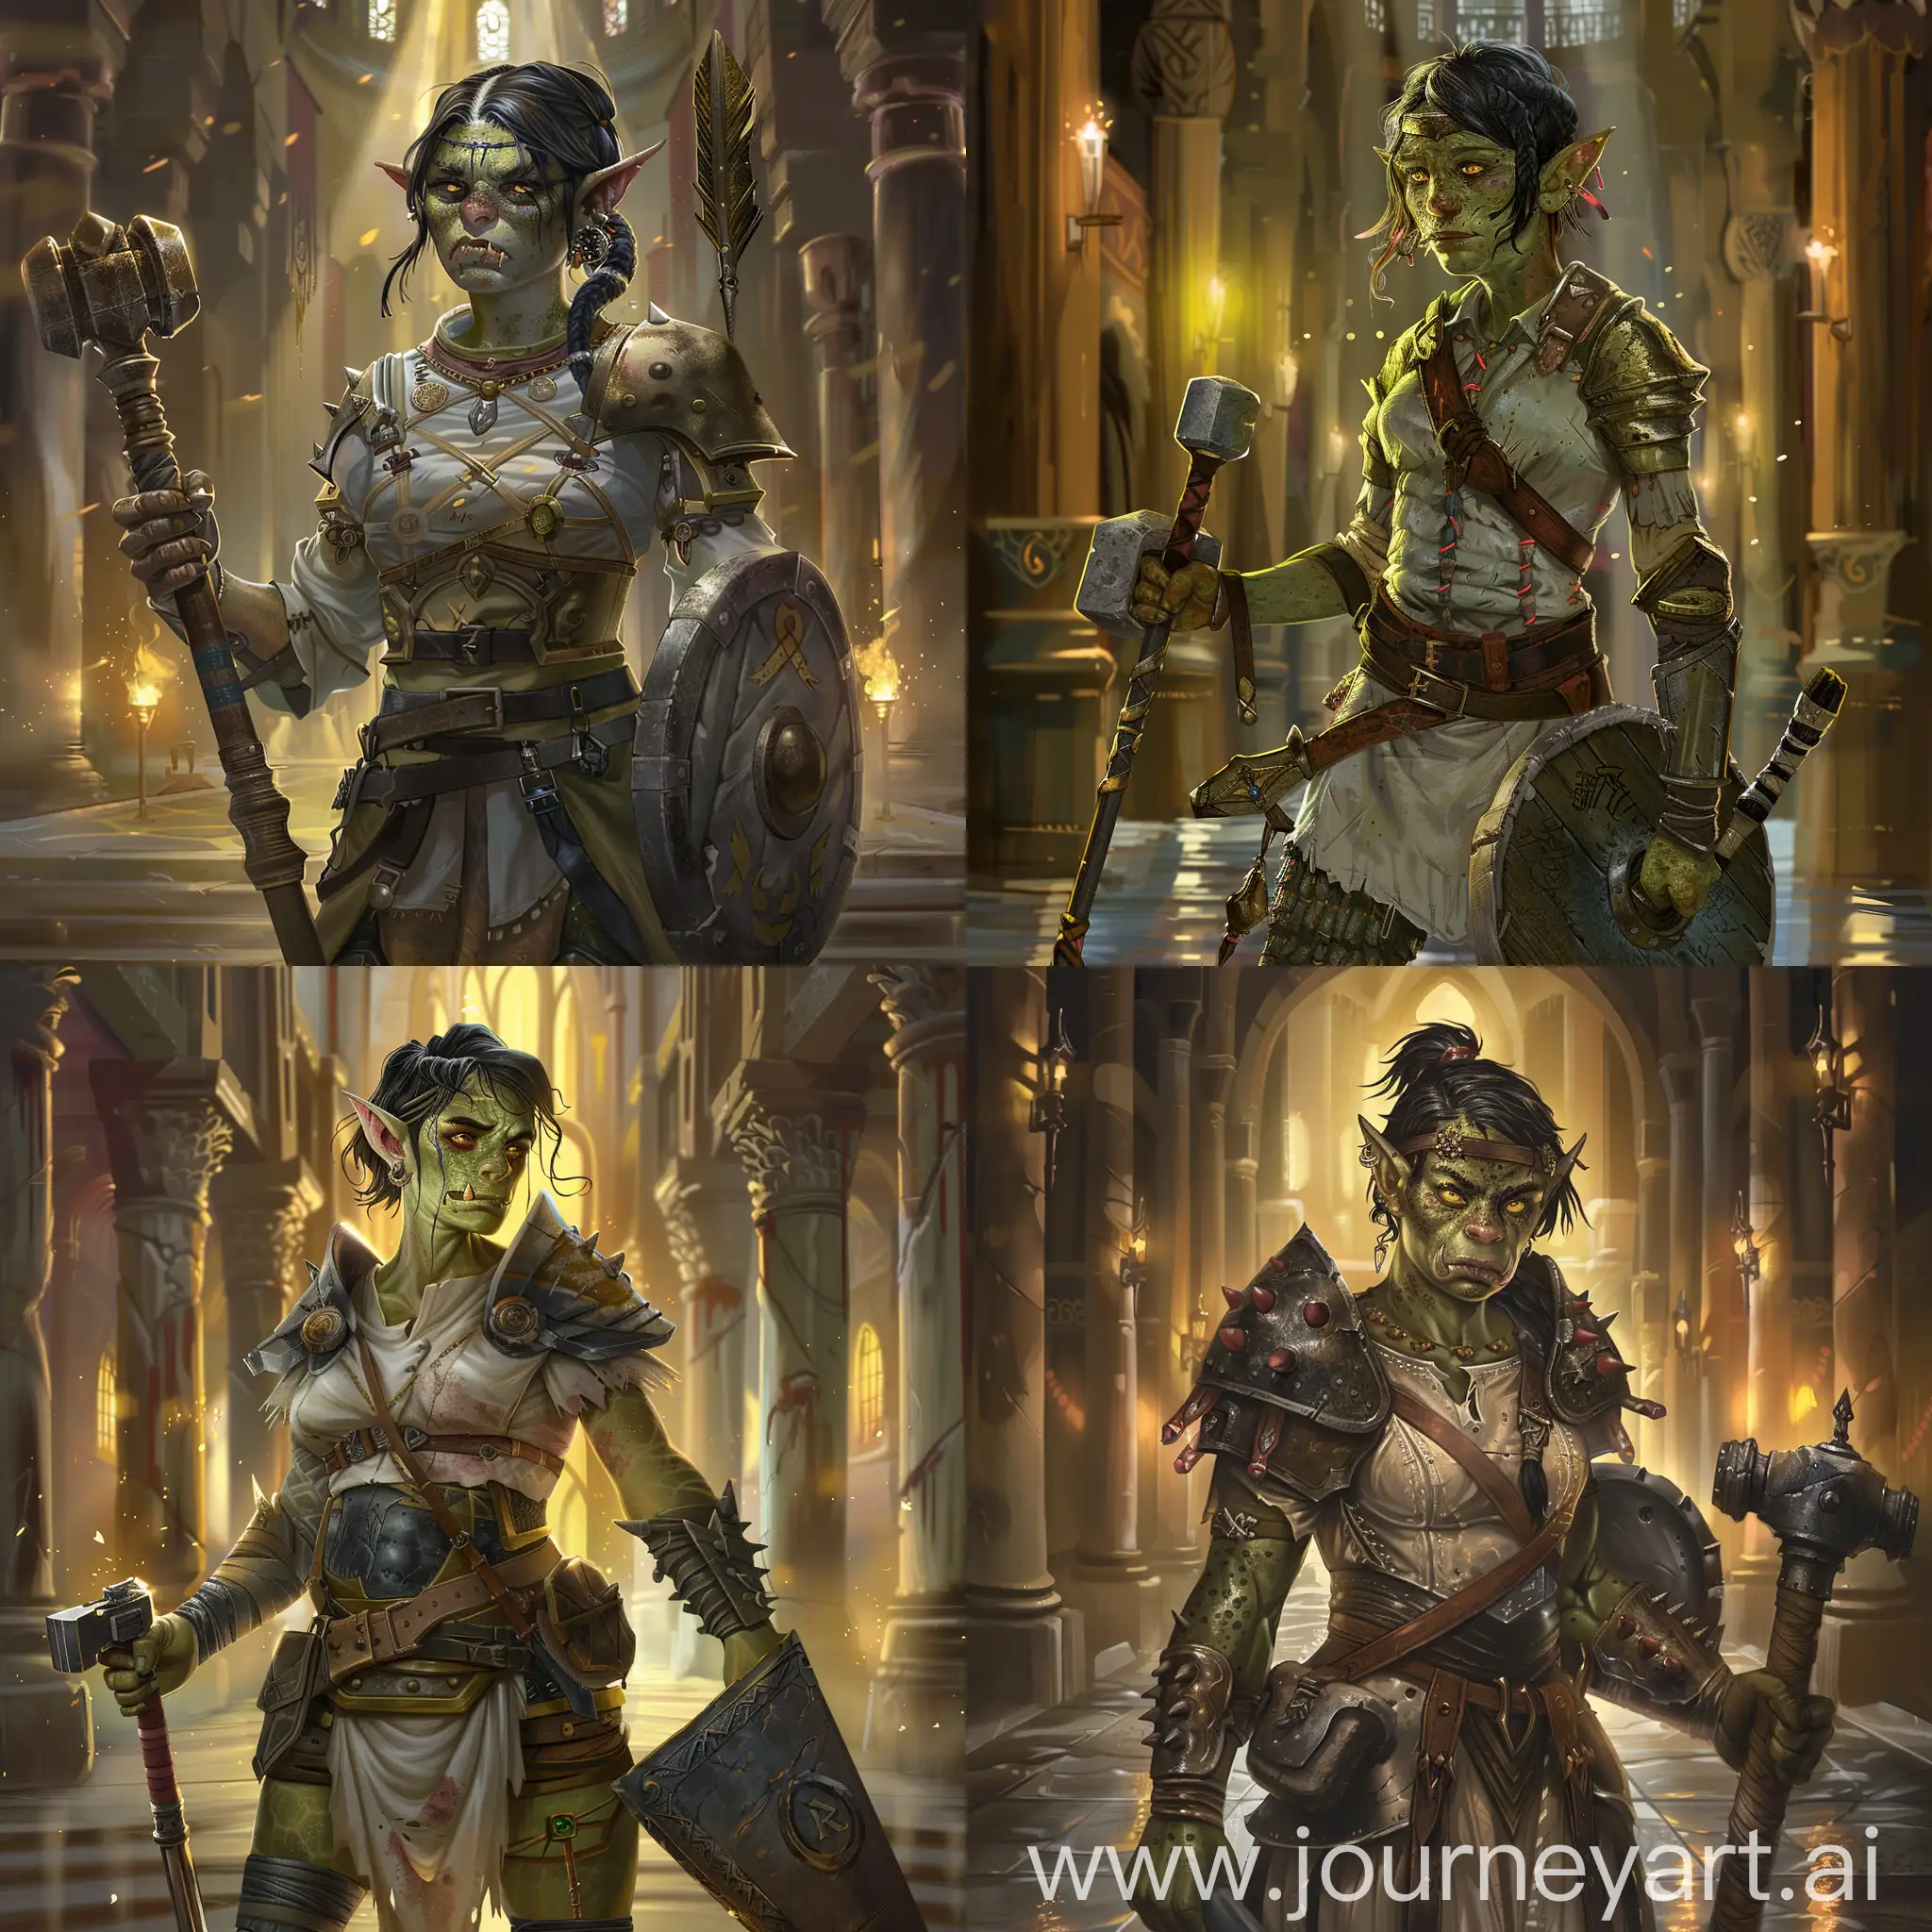 Draw a character from the Dungeons and Dragons universe according to the following description: she is female orc, dressed in light medieval warrior clothes. She has a mace and a shield. She has green skin with freckles, yellow eyes, short black hair with little braid. Sharp fangs are visible from under the lower lip. Medieval hall with columns, illuminated by magical light in the background